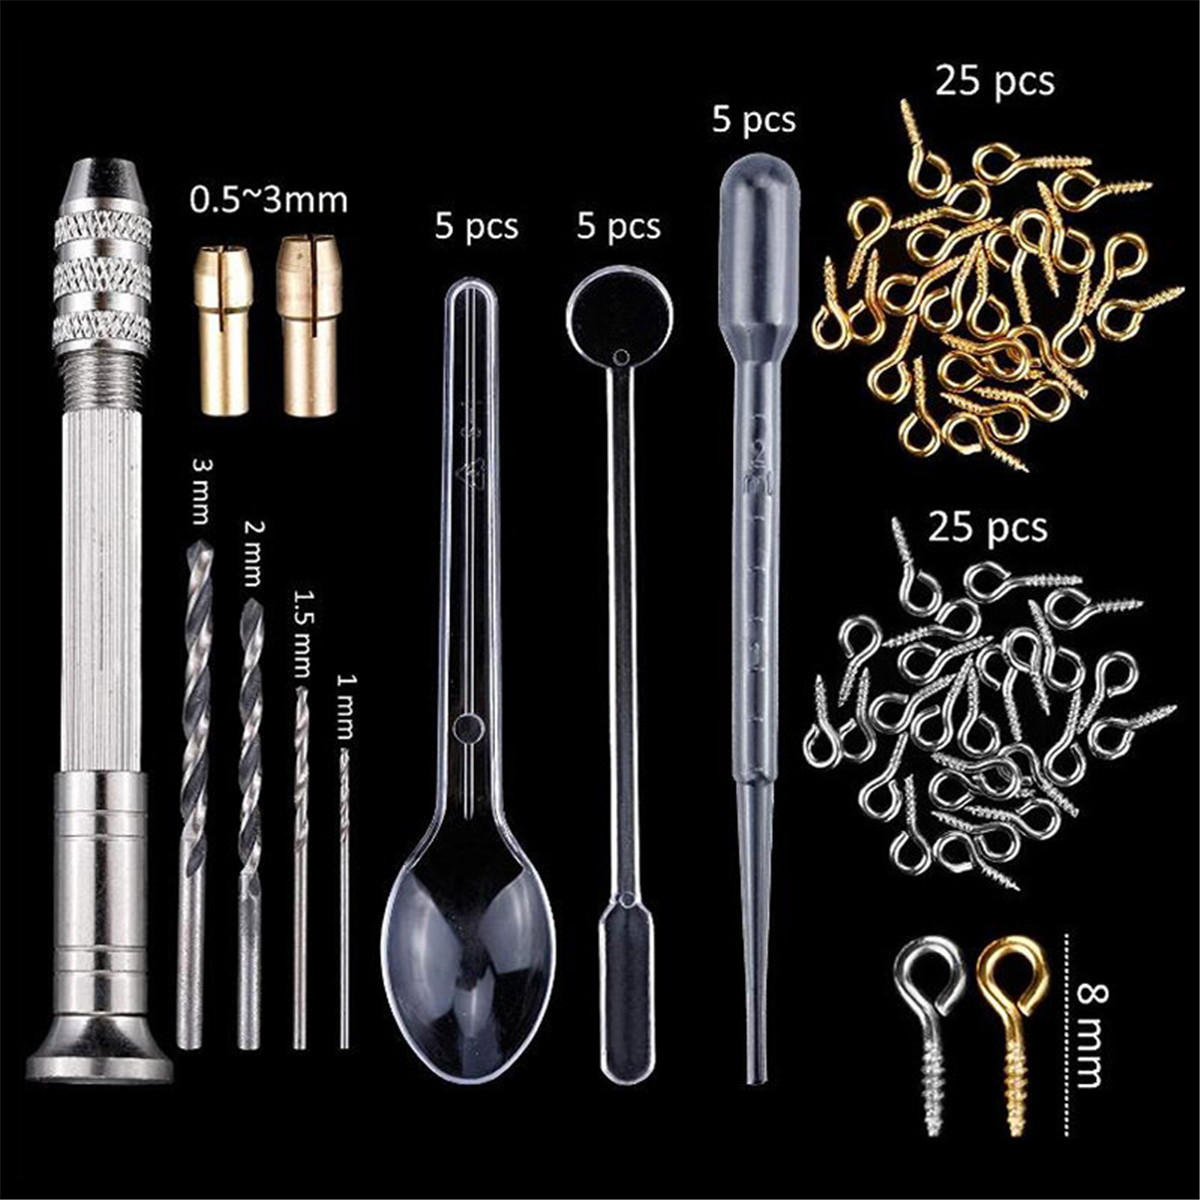 83x-Silicone-Resin-Casting-Mold-Tool-Sets-Kit-DIY-Pendant-Jewelry-Bracelet-Making-1808640-4